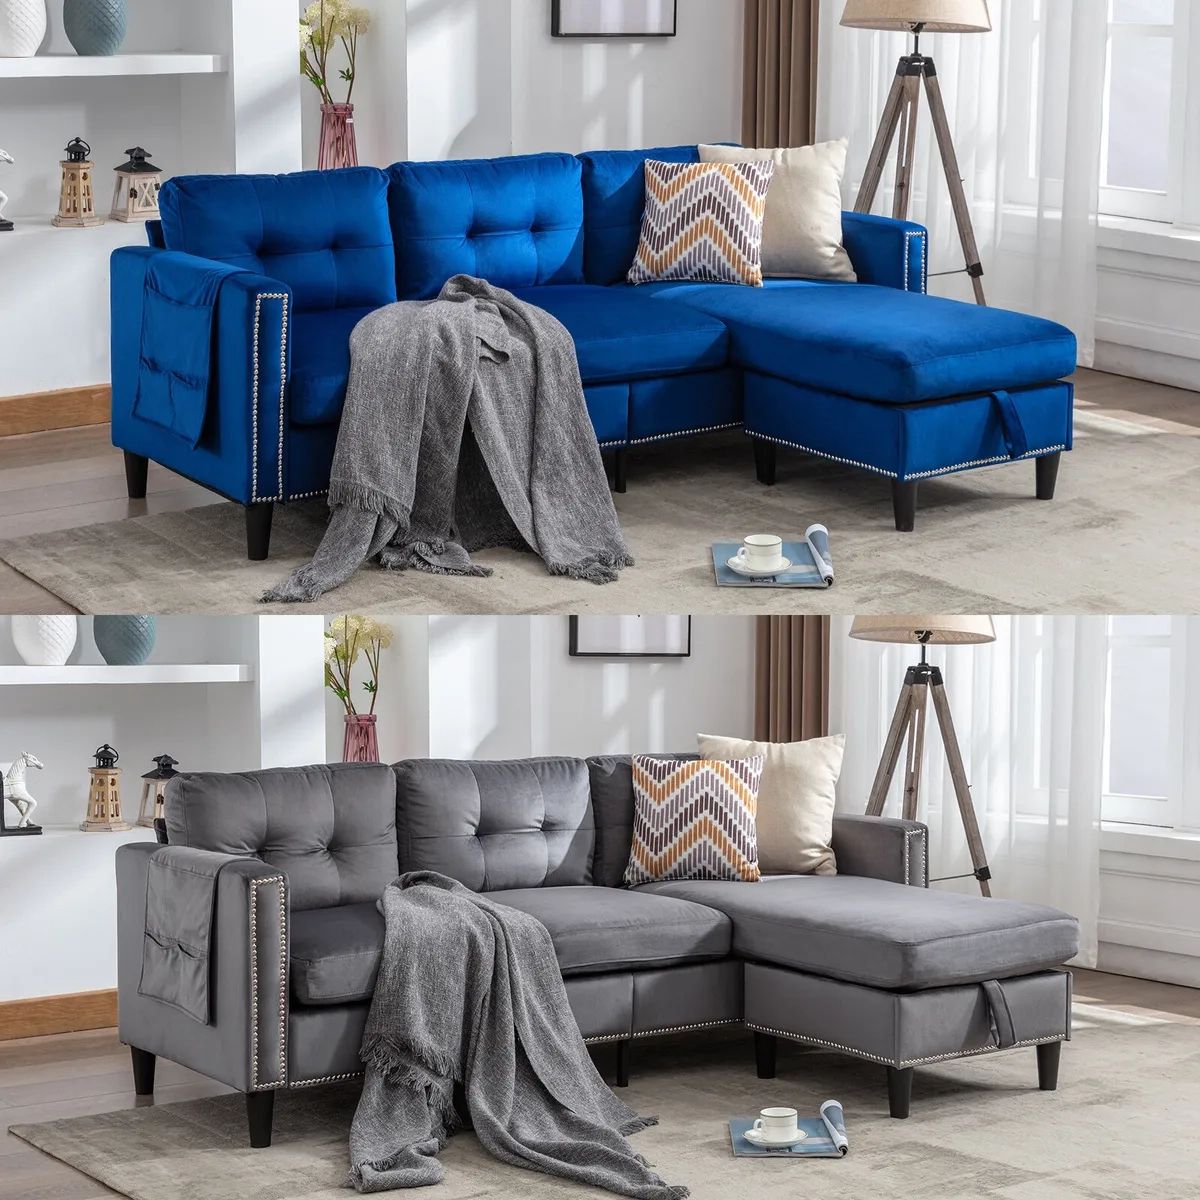 Gray/Blue Velvet L Shape Convertible Sofa Couch Reversible Chaise W/  Storage,Usb | Ebay Intended For L Shape Couches With Reversible Chaises (View 9 of 15)